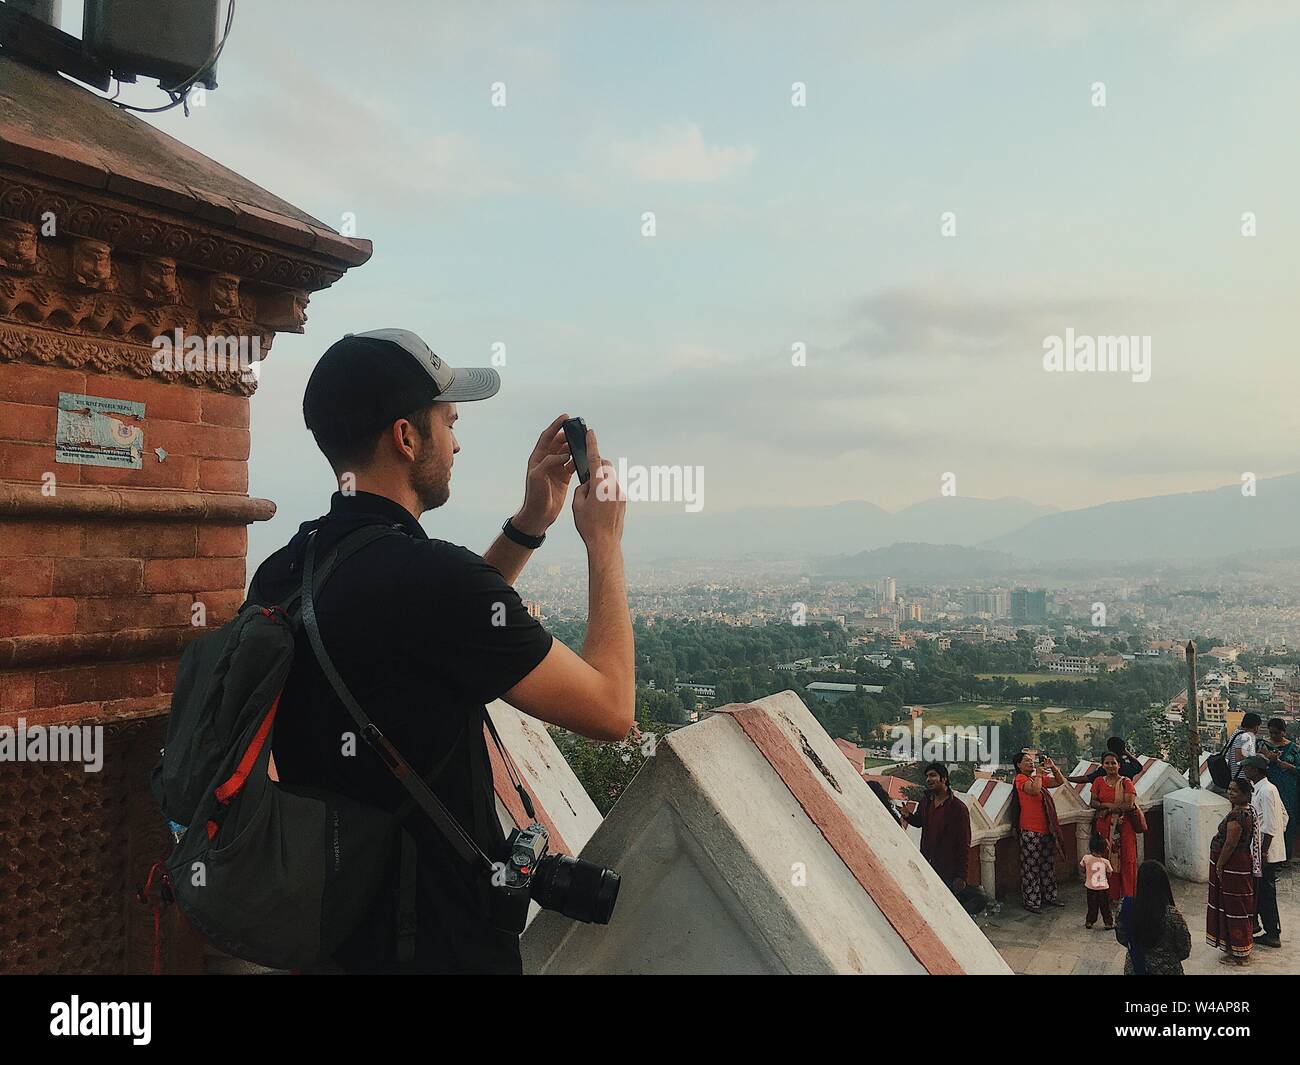 Man taking picture on phone overlooking city in Nepal Stock Photo